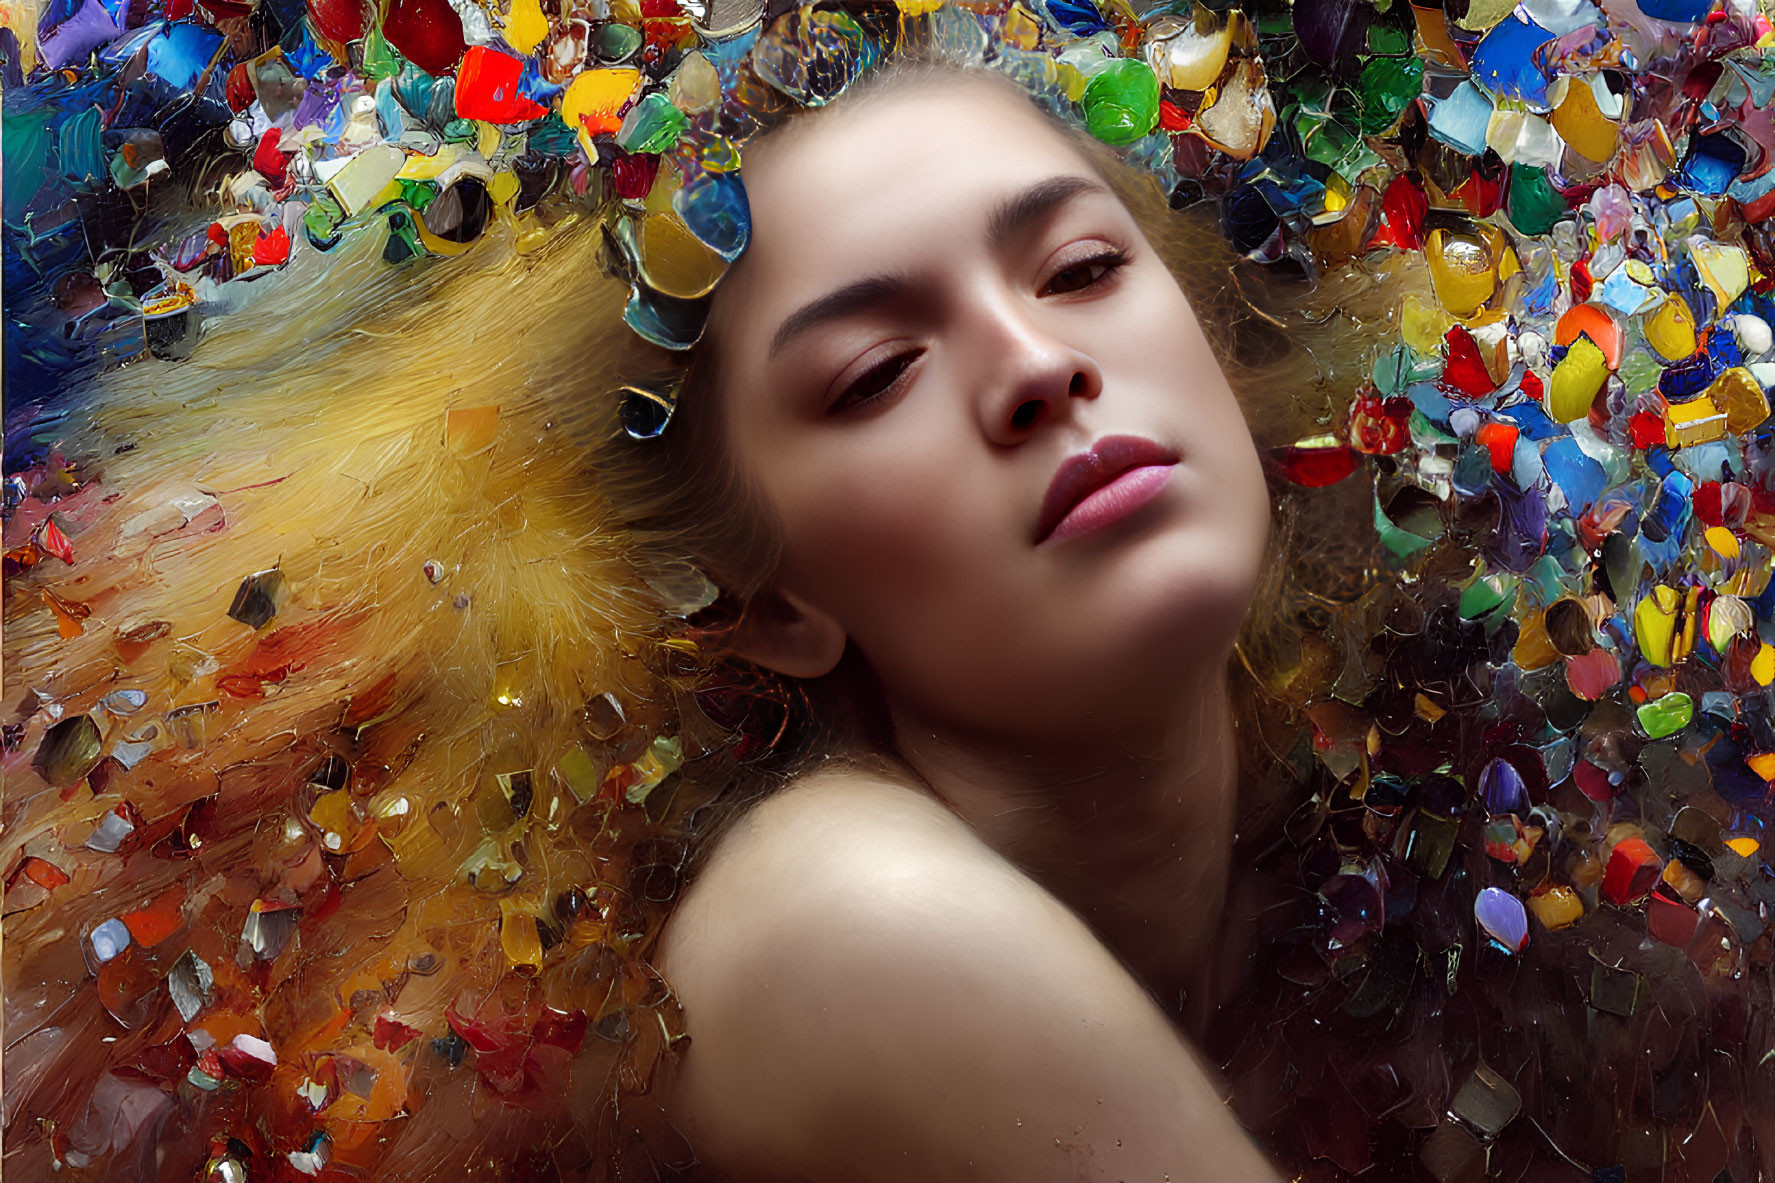 Colorful Gemstone-Like Fragments Surround Woman's Face